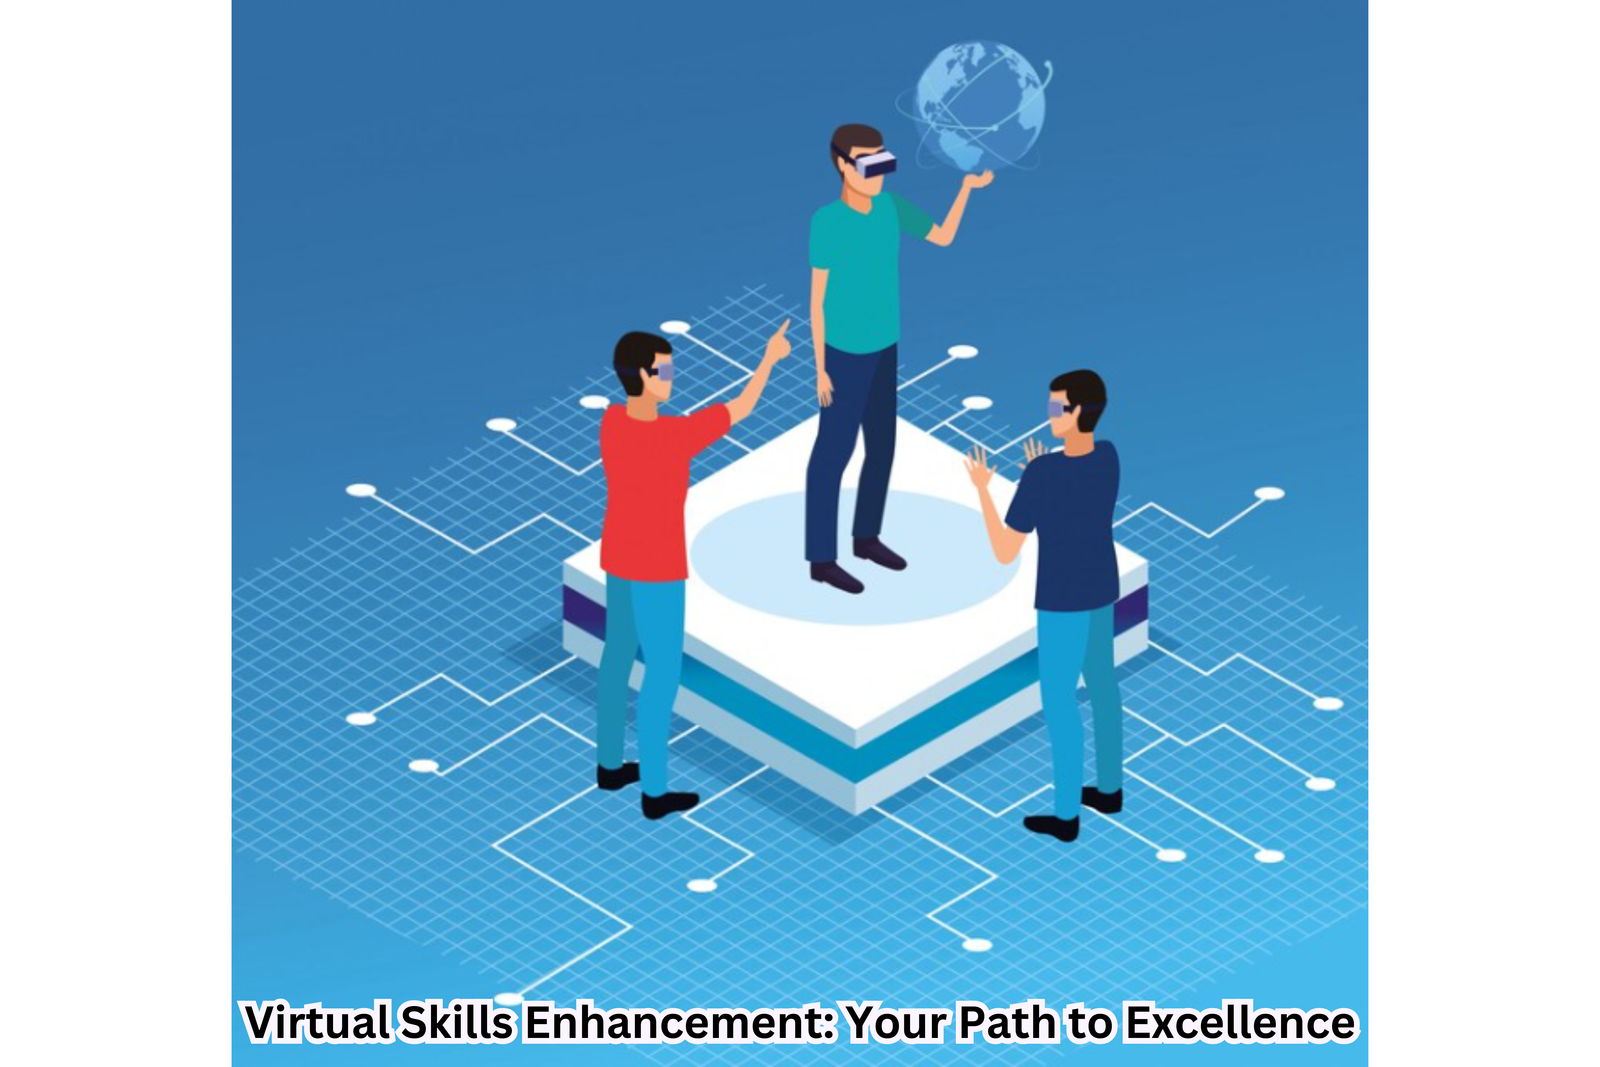 An image representing virtual skills enhancement, showcasing a diverse set of hands reaching towards a virtual interface symbolizing the path to excellence through online learning."